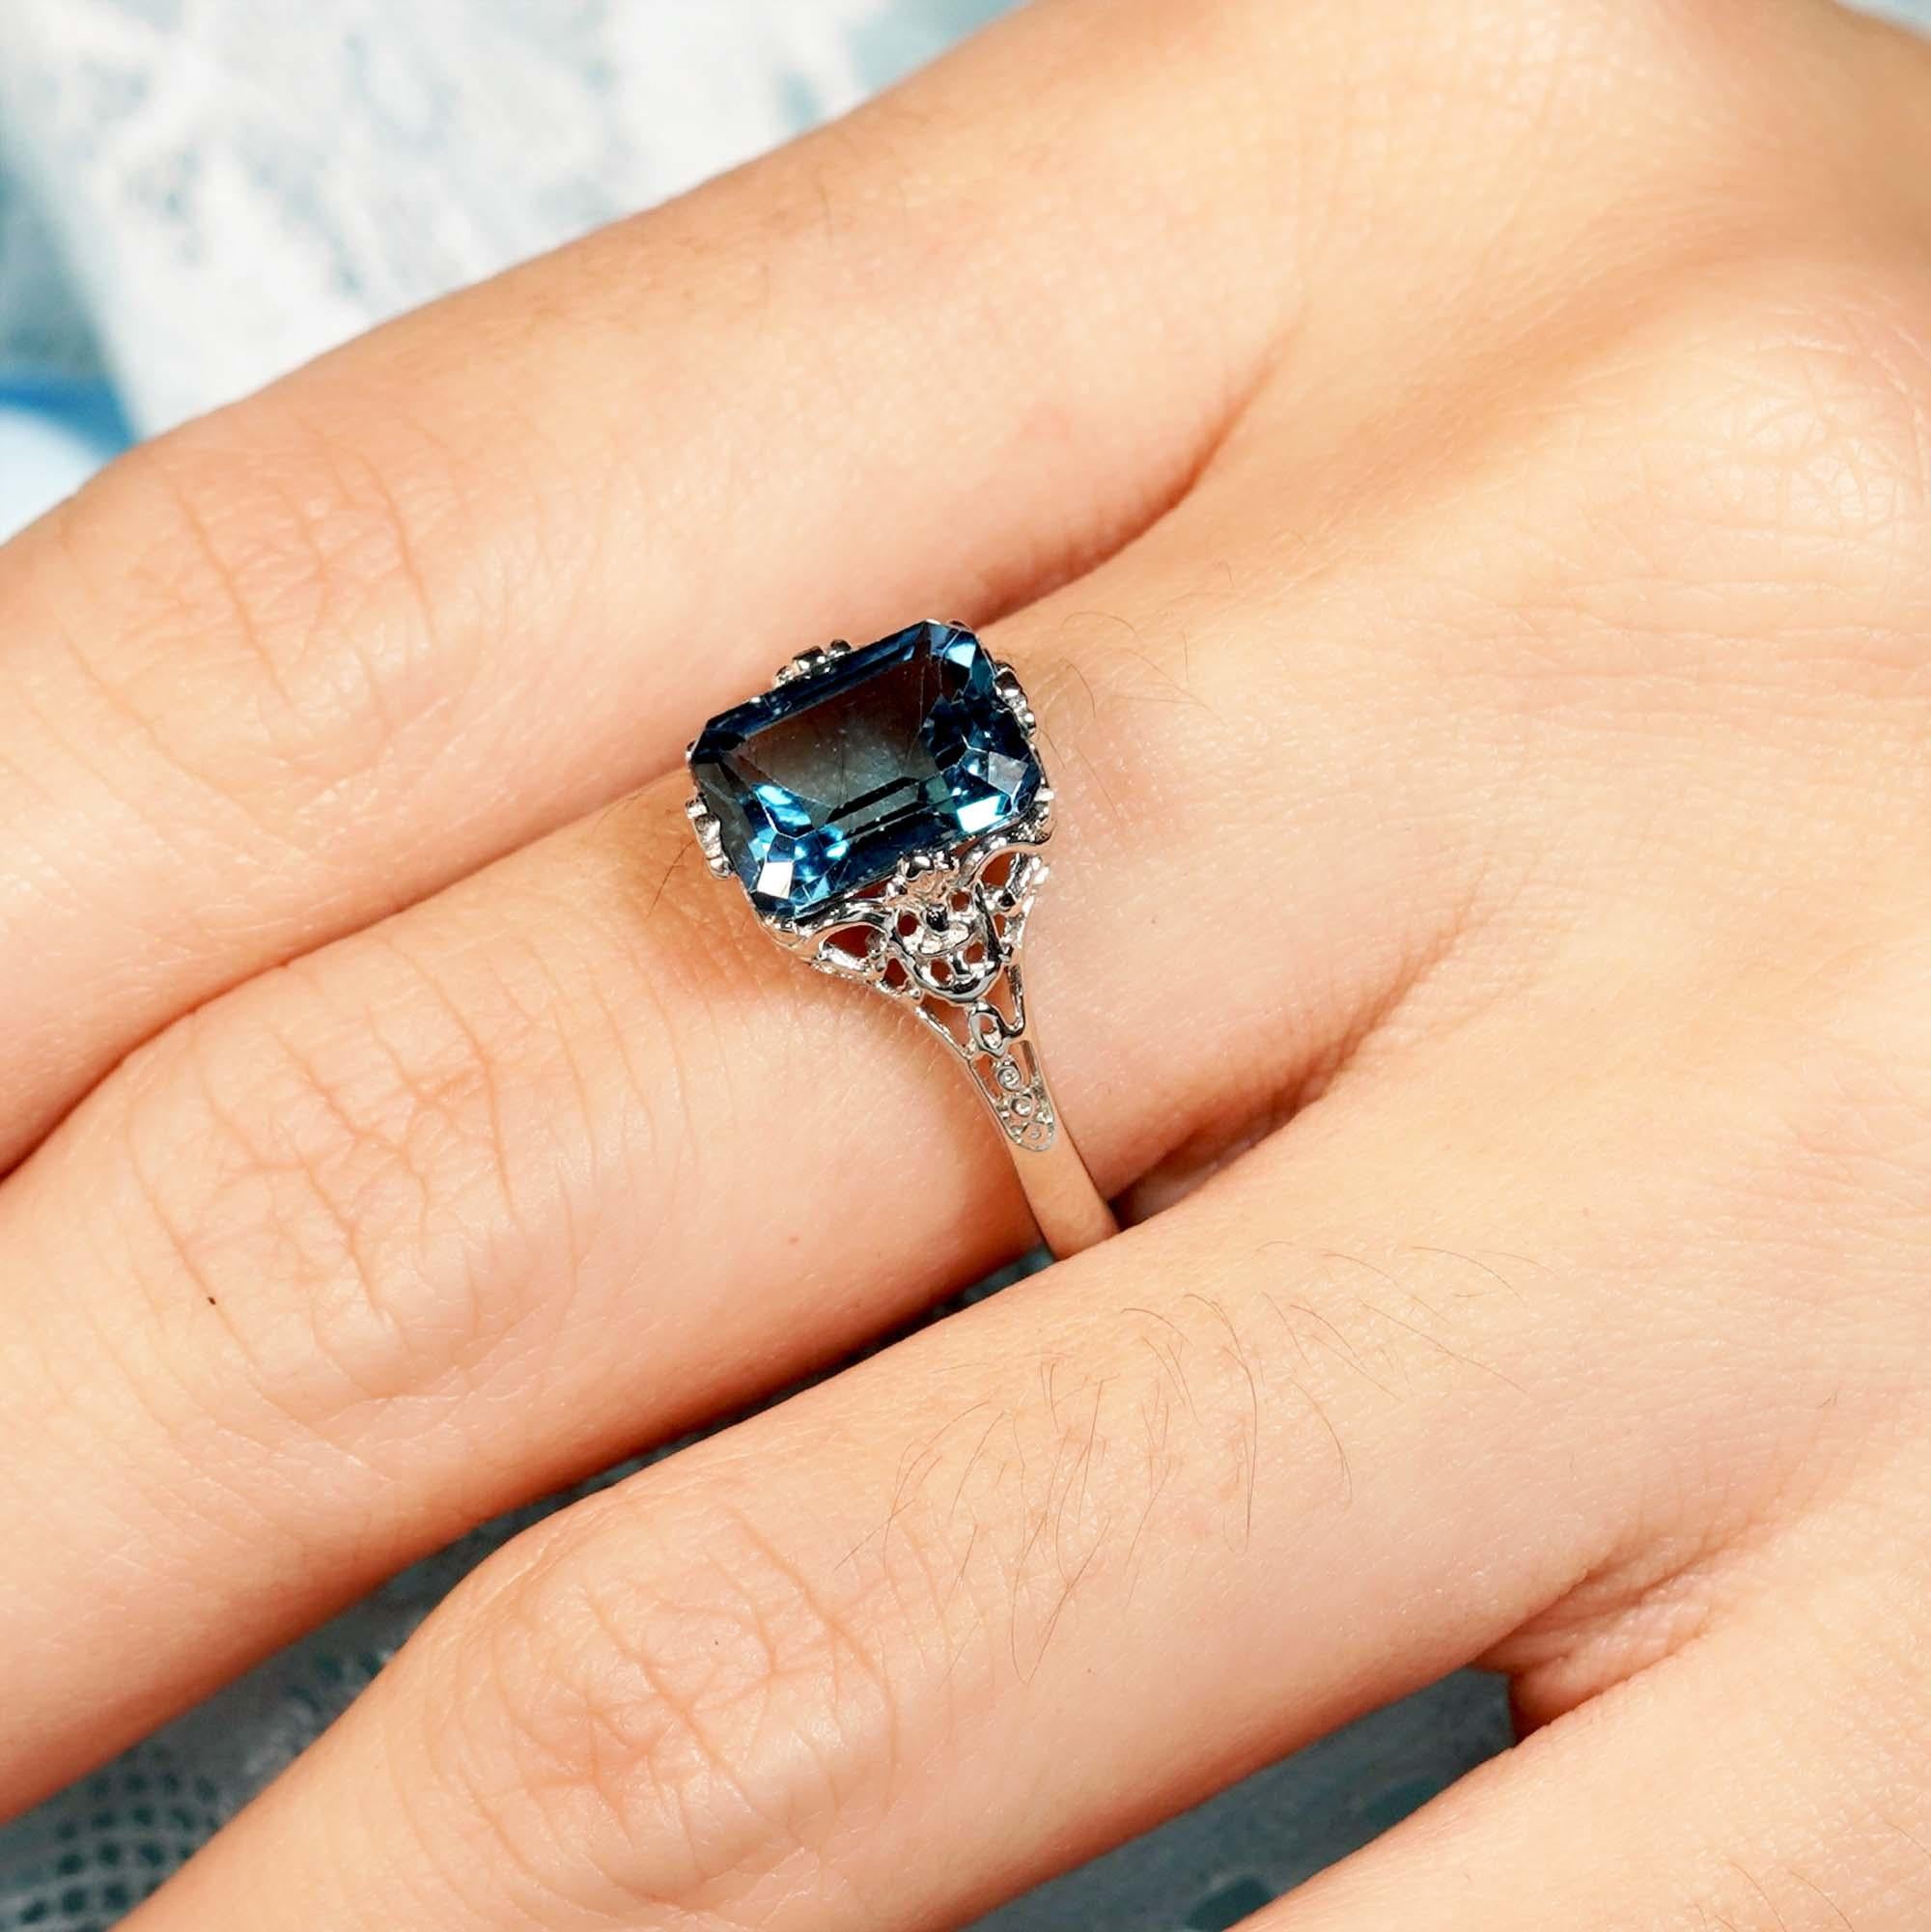 For Sale:  4.5 Ct. Natural London Blue Topaz Vintage Style Solitaire Ring in 9K White Gold 10